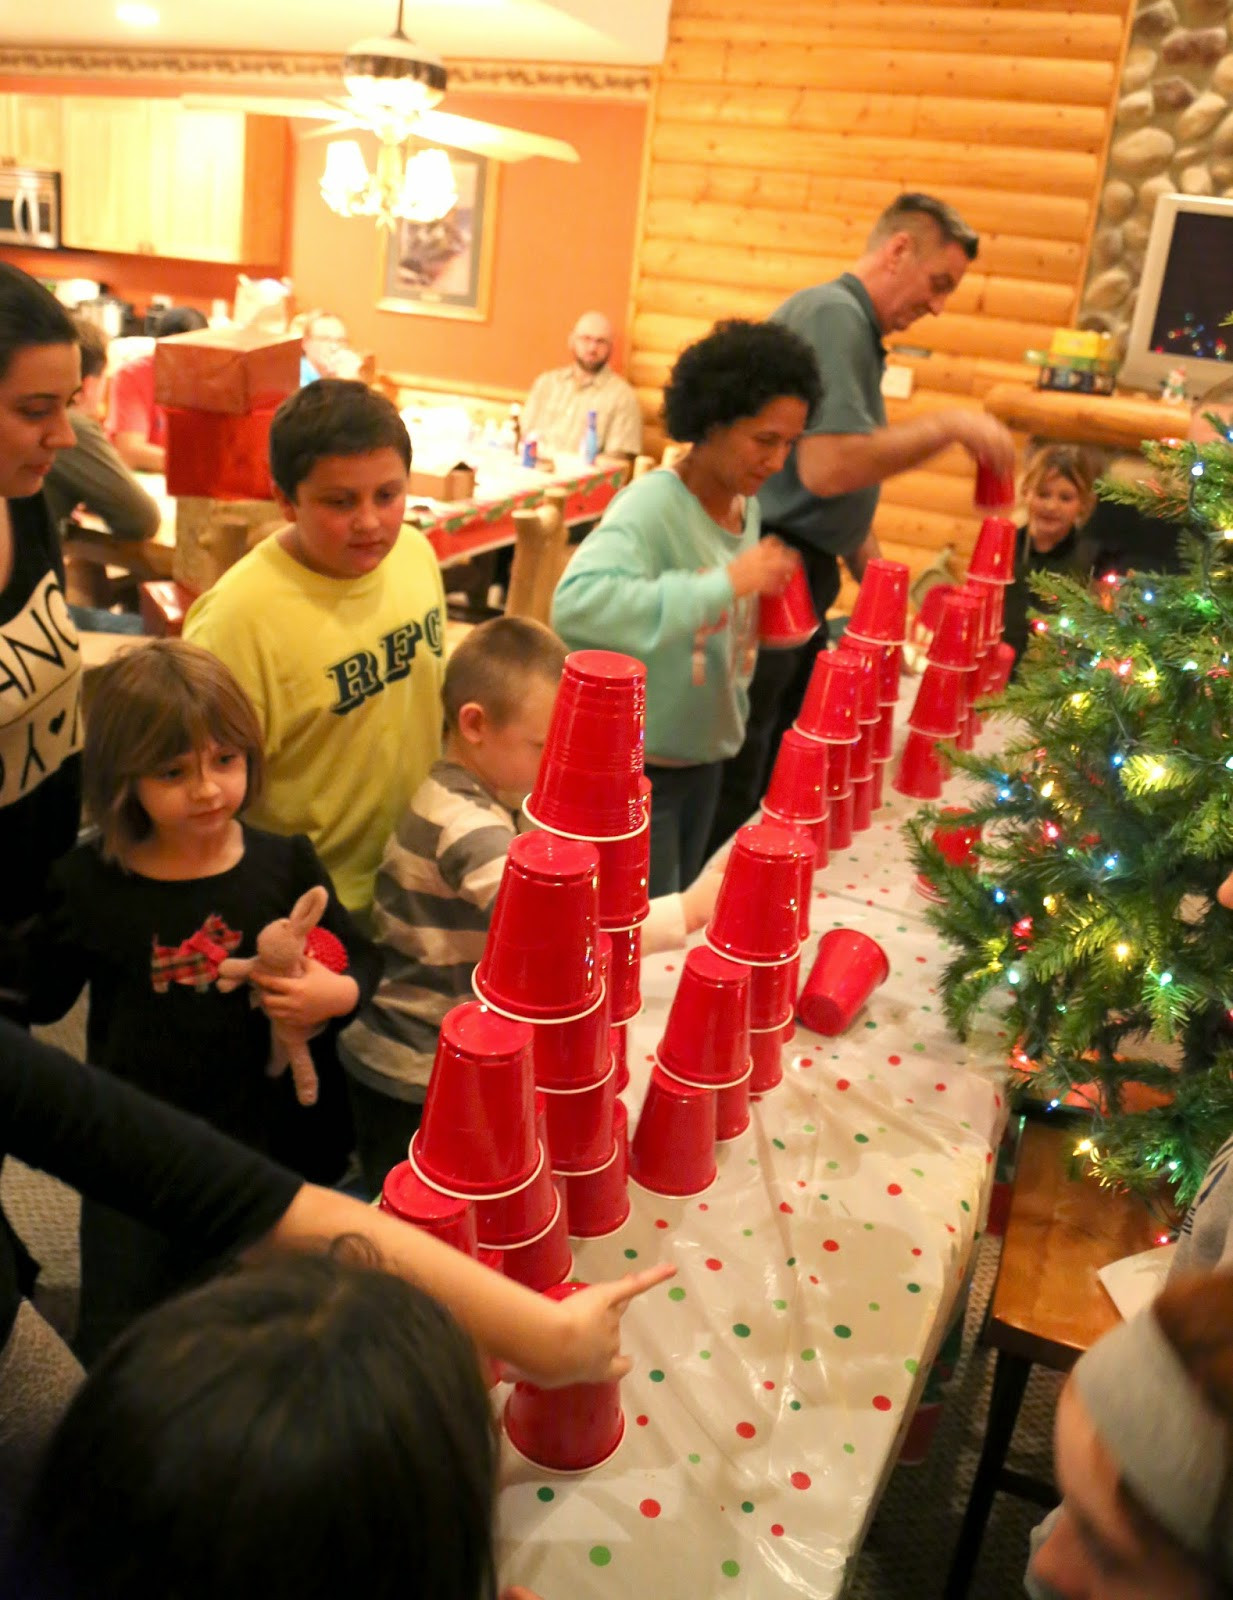 The 25 Best Ideas for Christmas Party Ideas for Families Home, Family